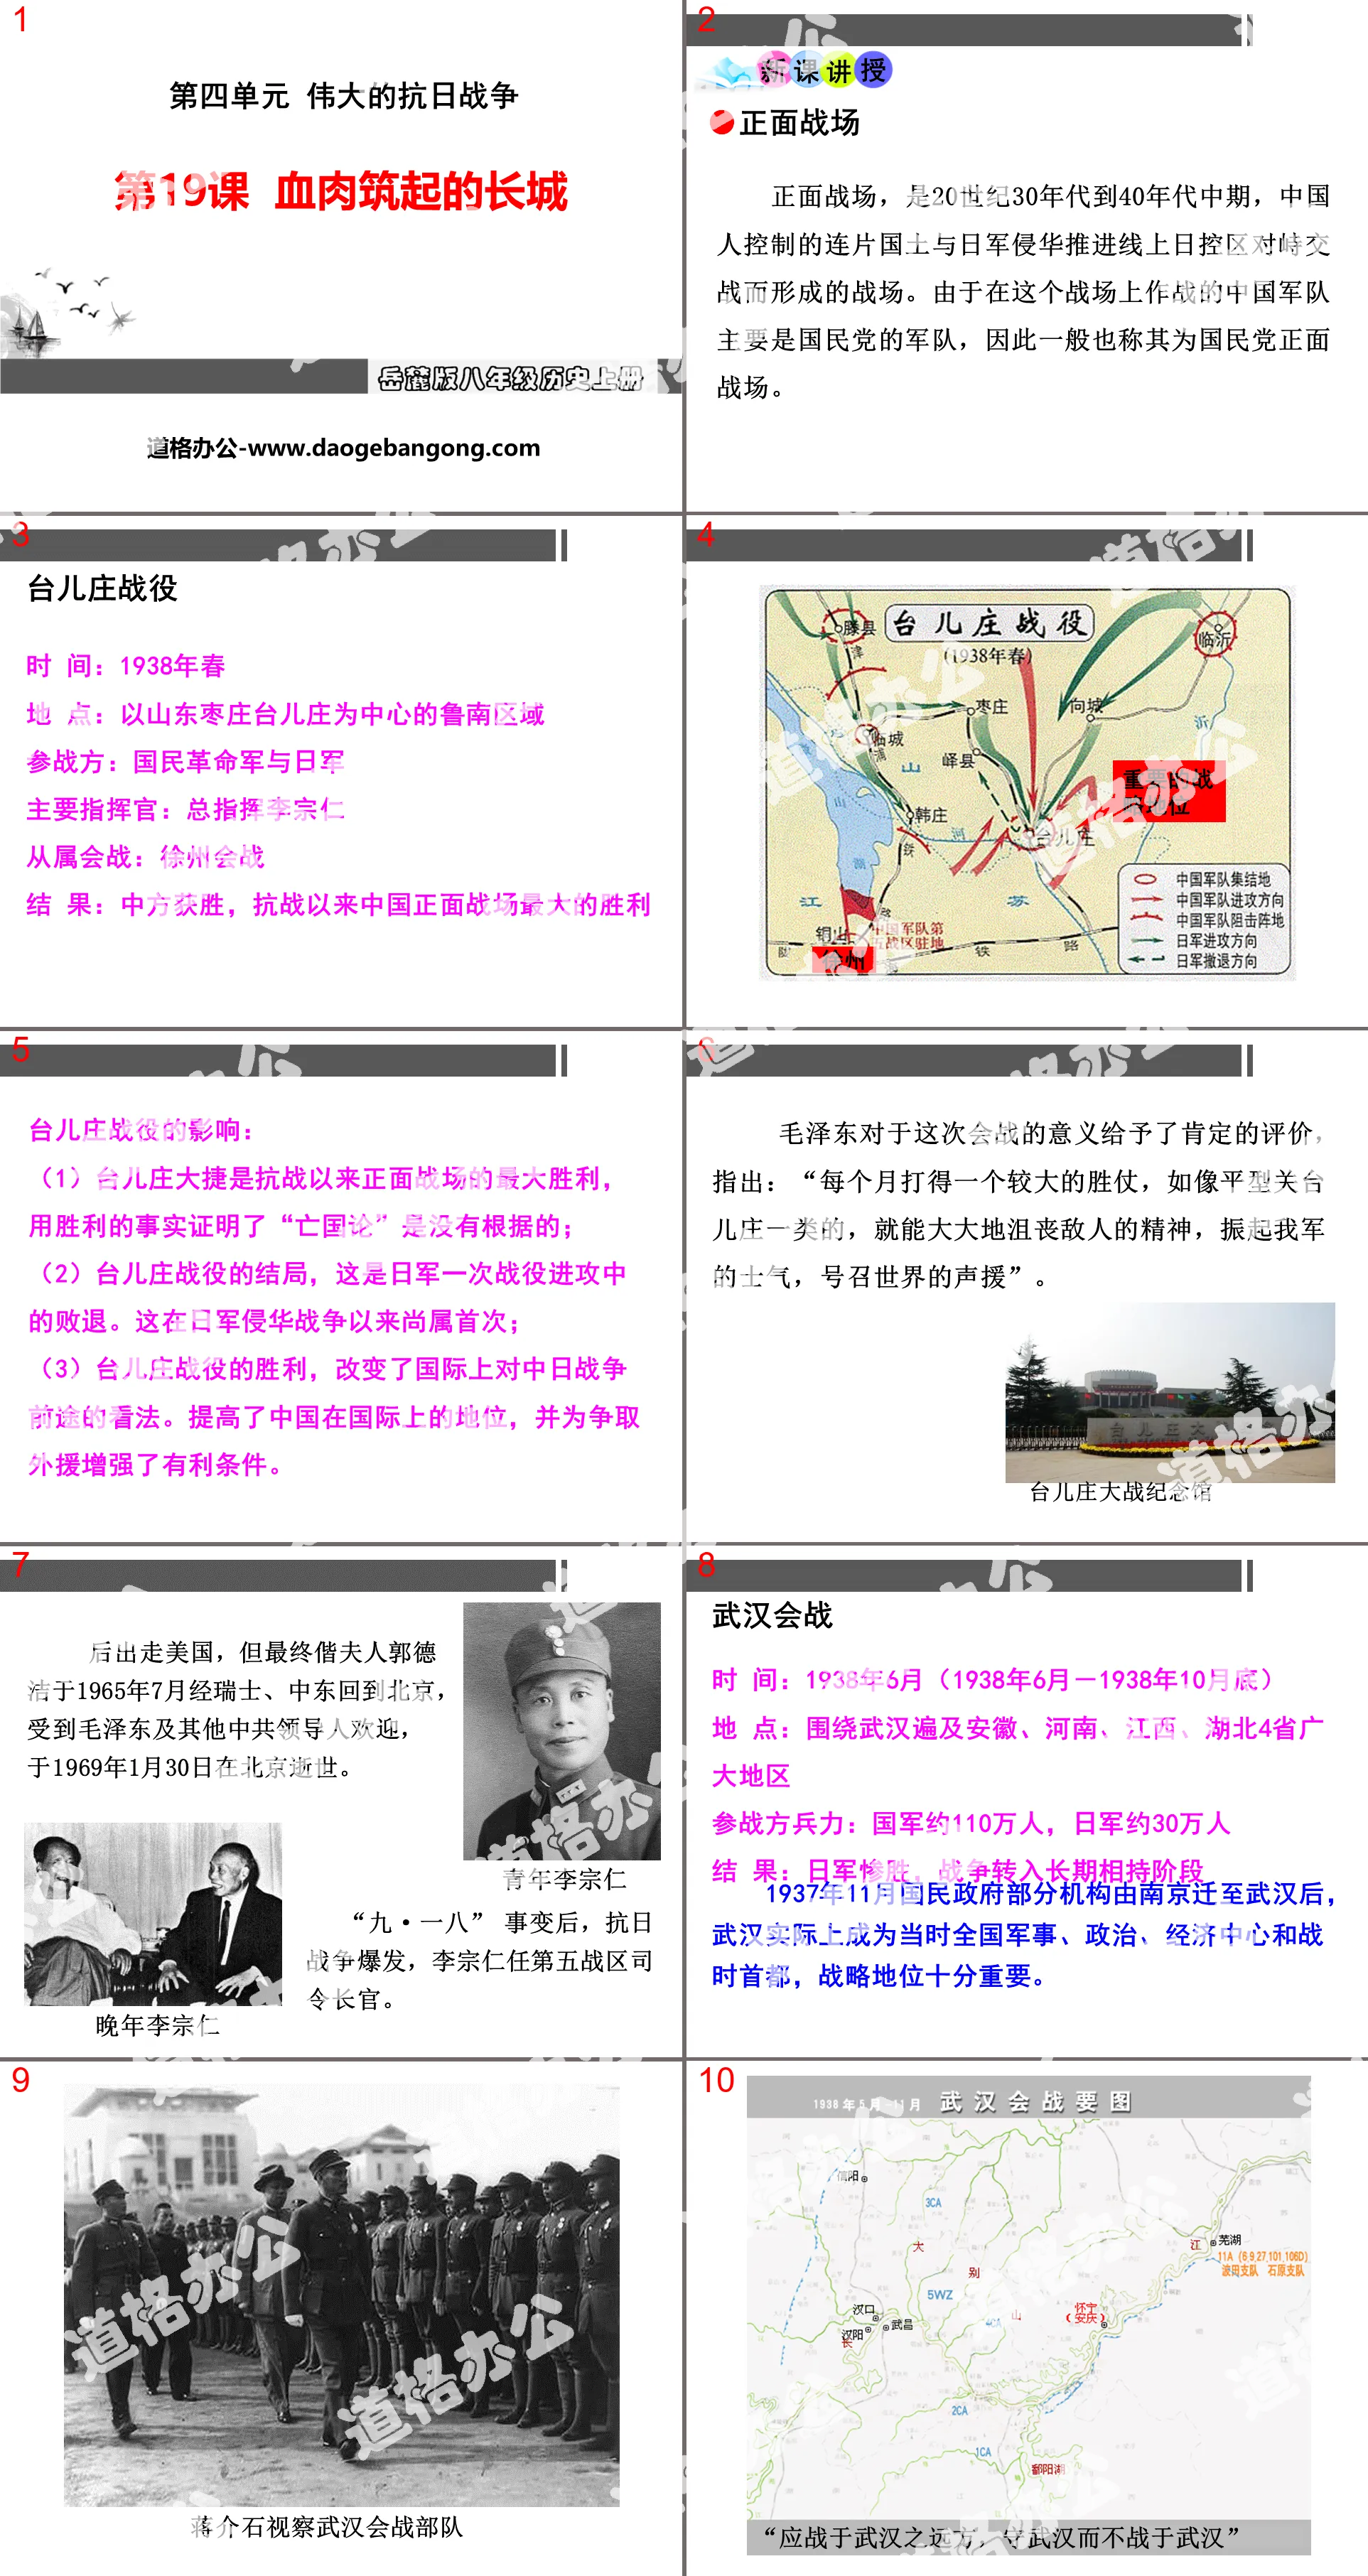 "The Great Wall Built of Flesh and Blood" PPT courseware of the great Anti-Japanese War